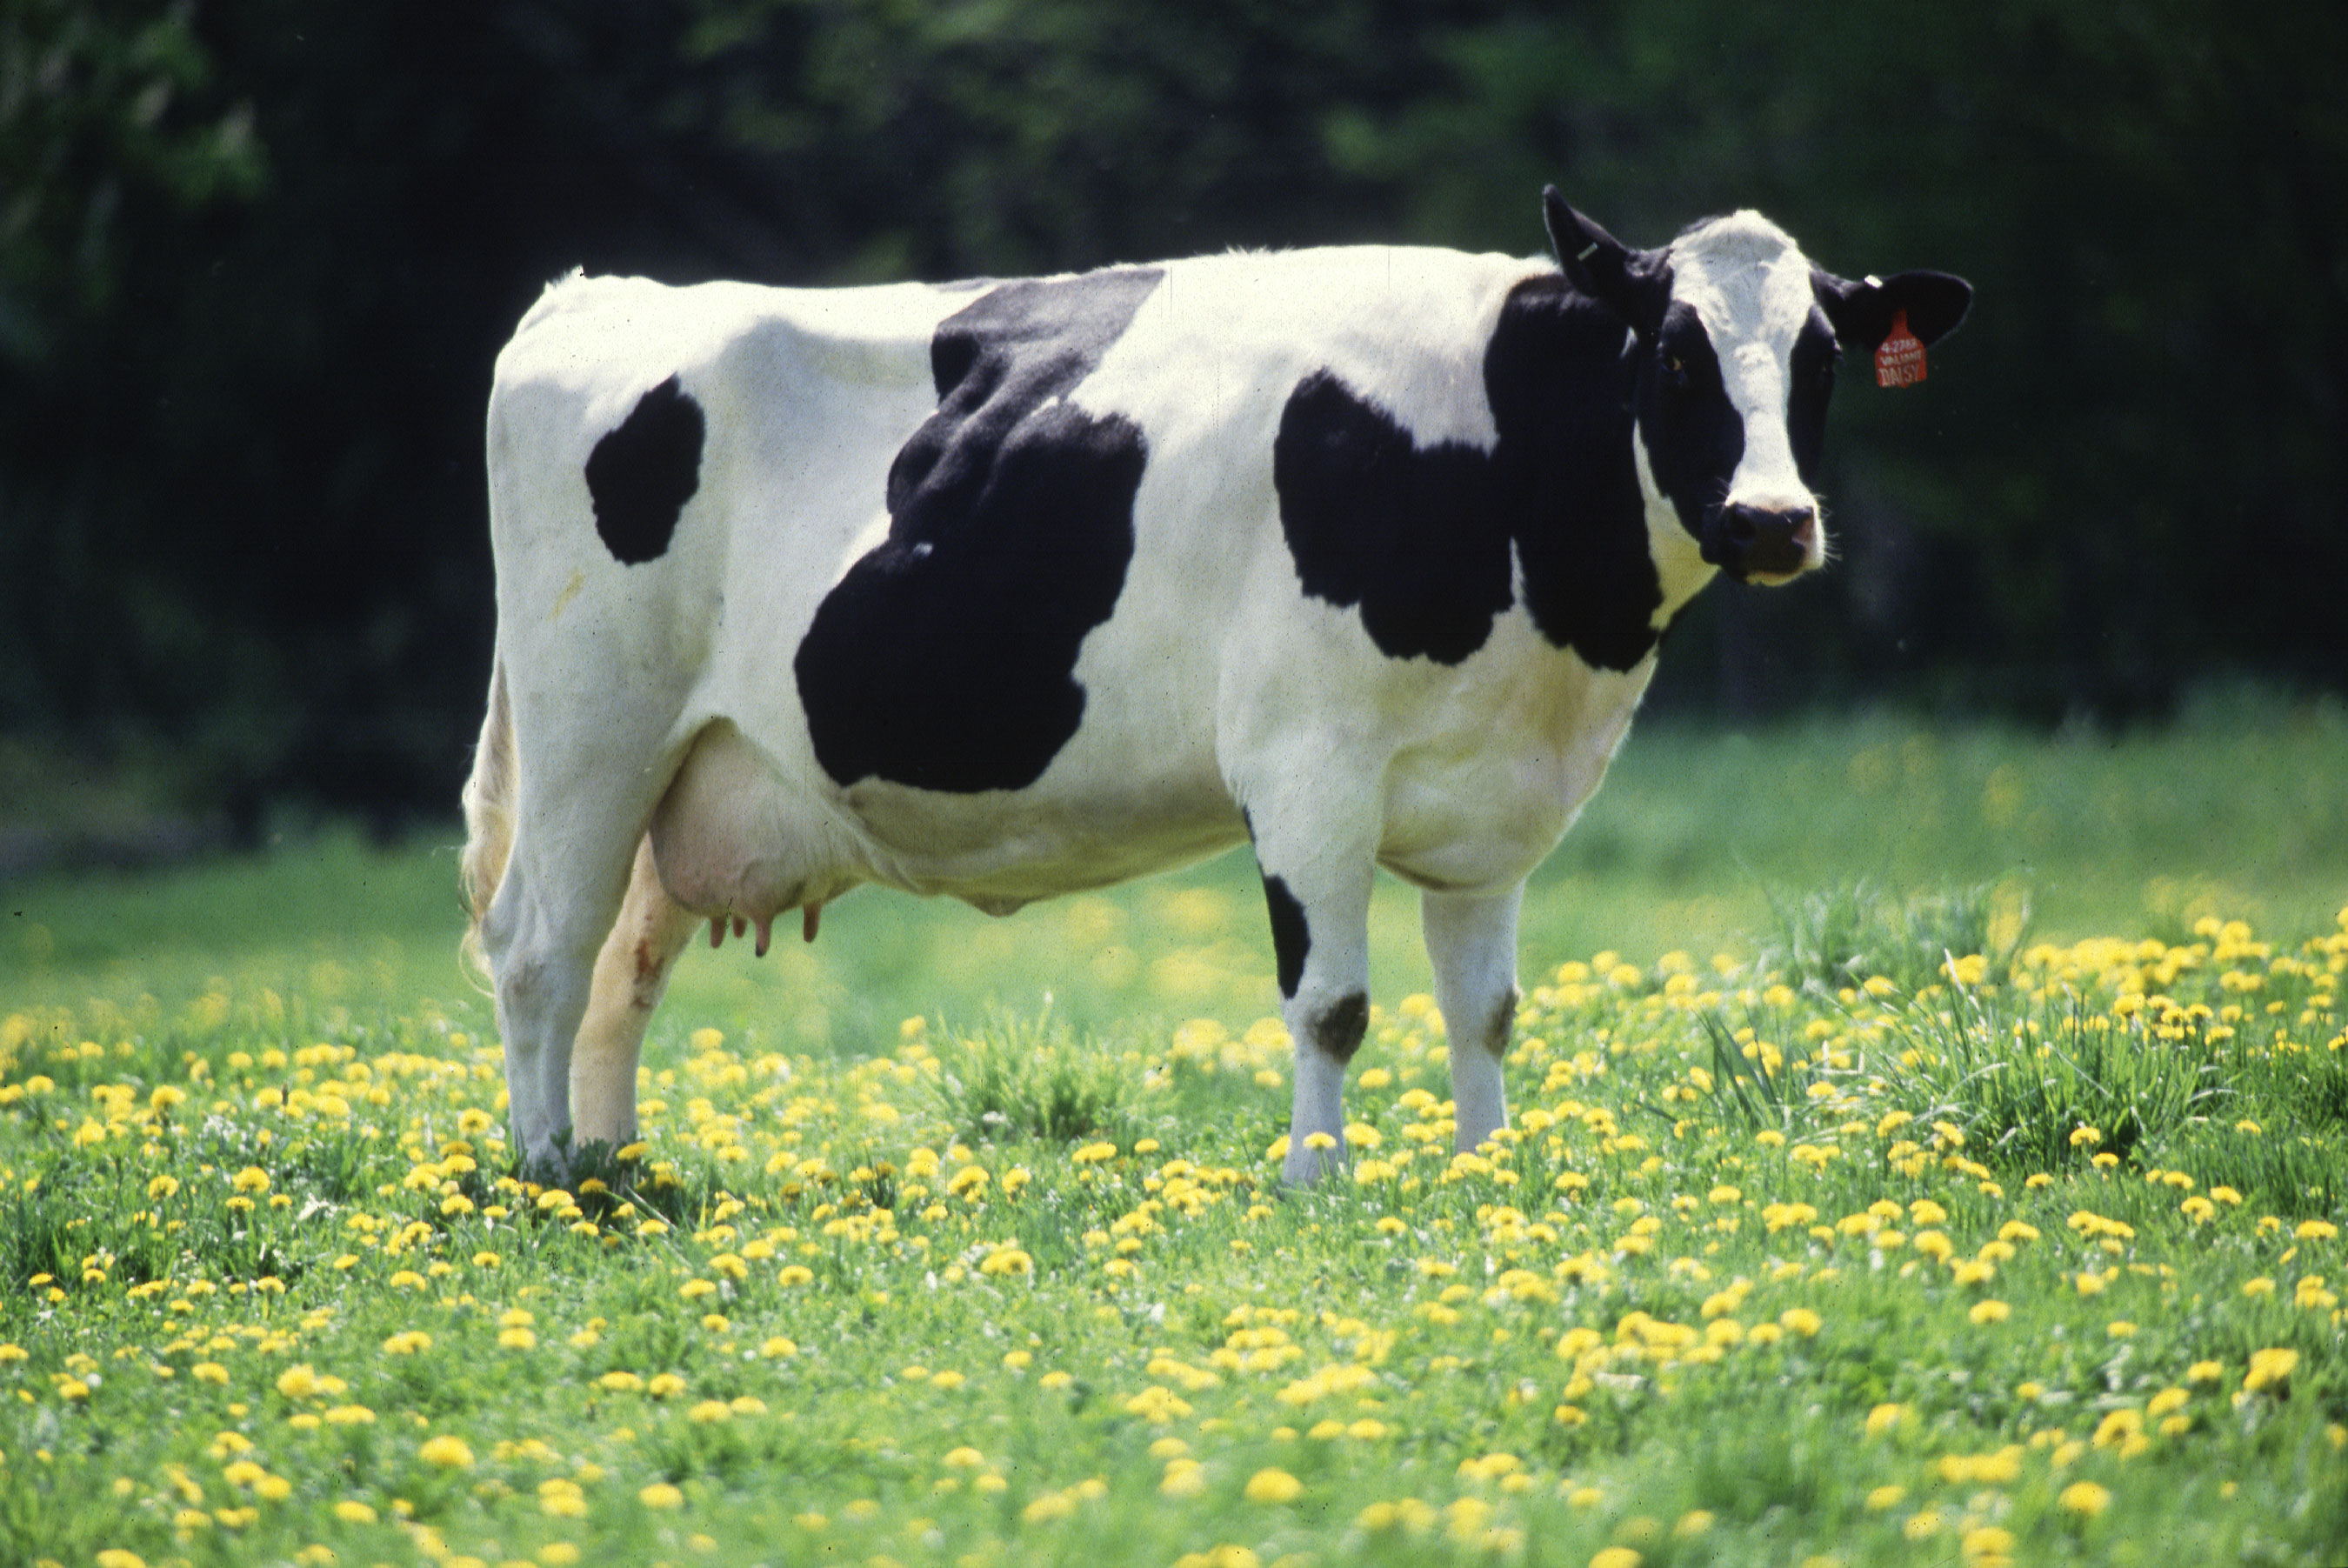 Producers on the dairy market are under exceptional pressure, the EMB warns